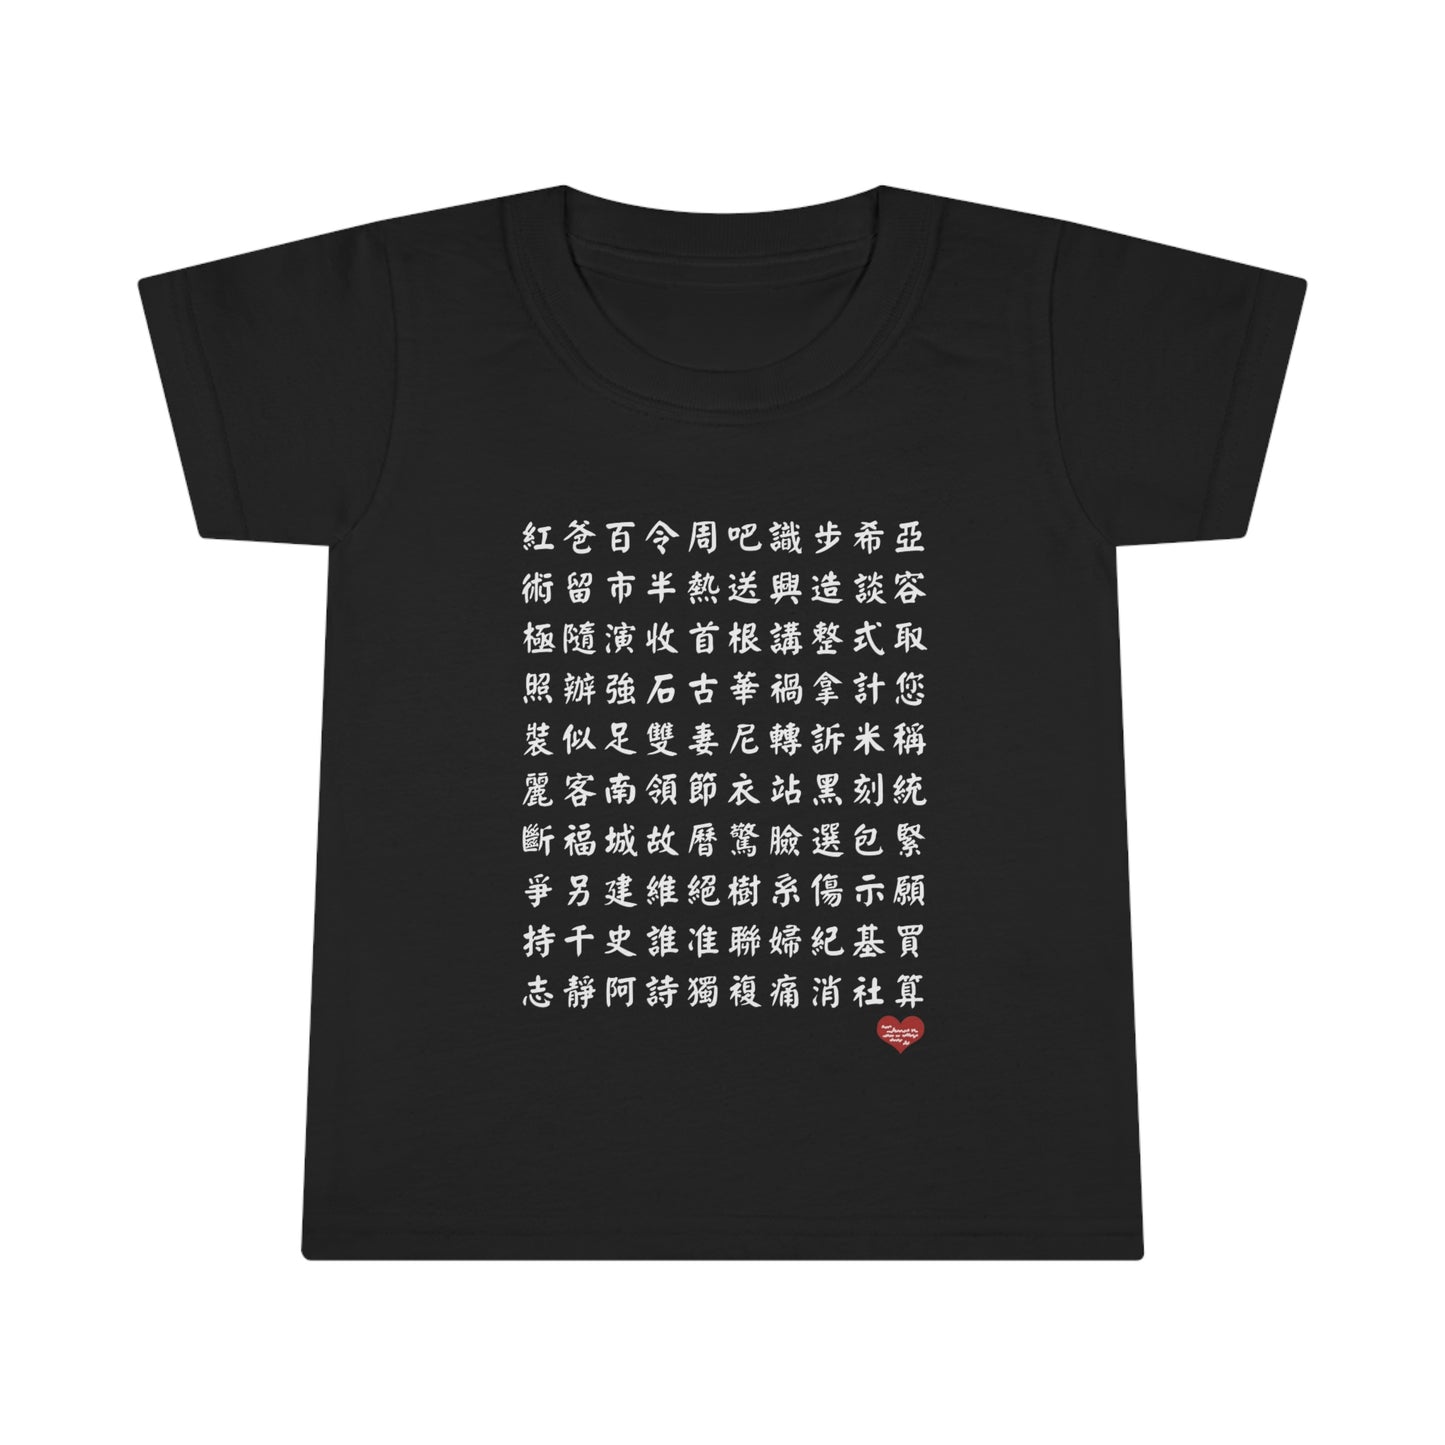 Toddler 1000 Characters Set 5,  1000漢字系列 #5 Color Block T-shirts